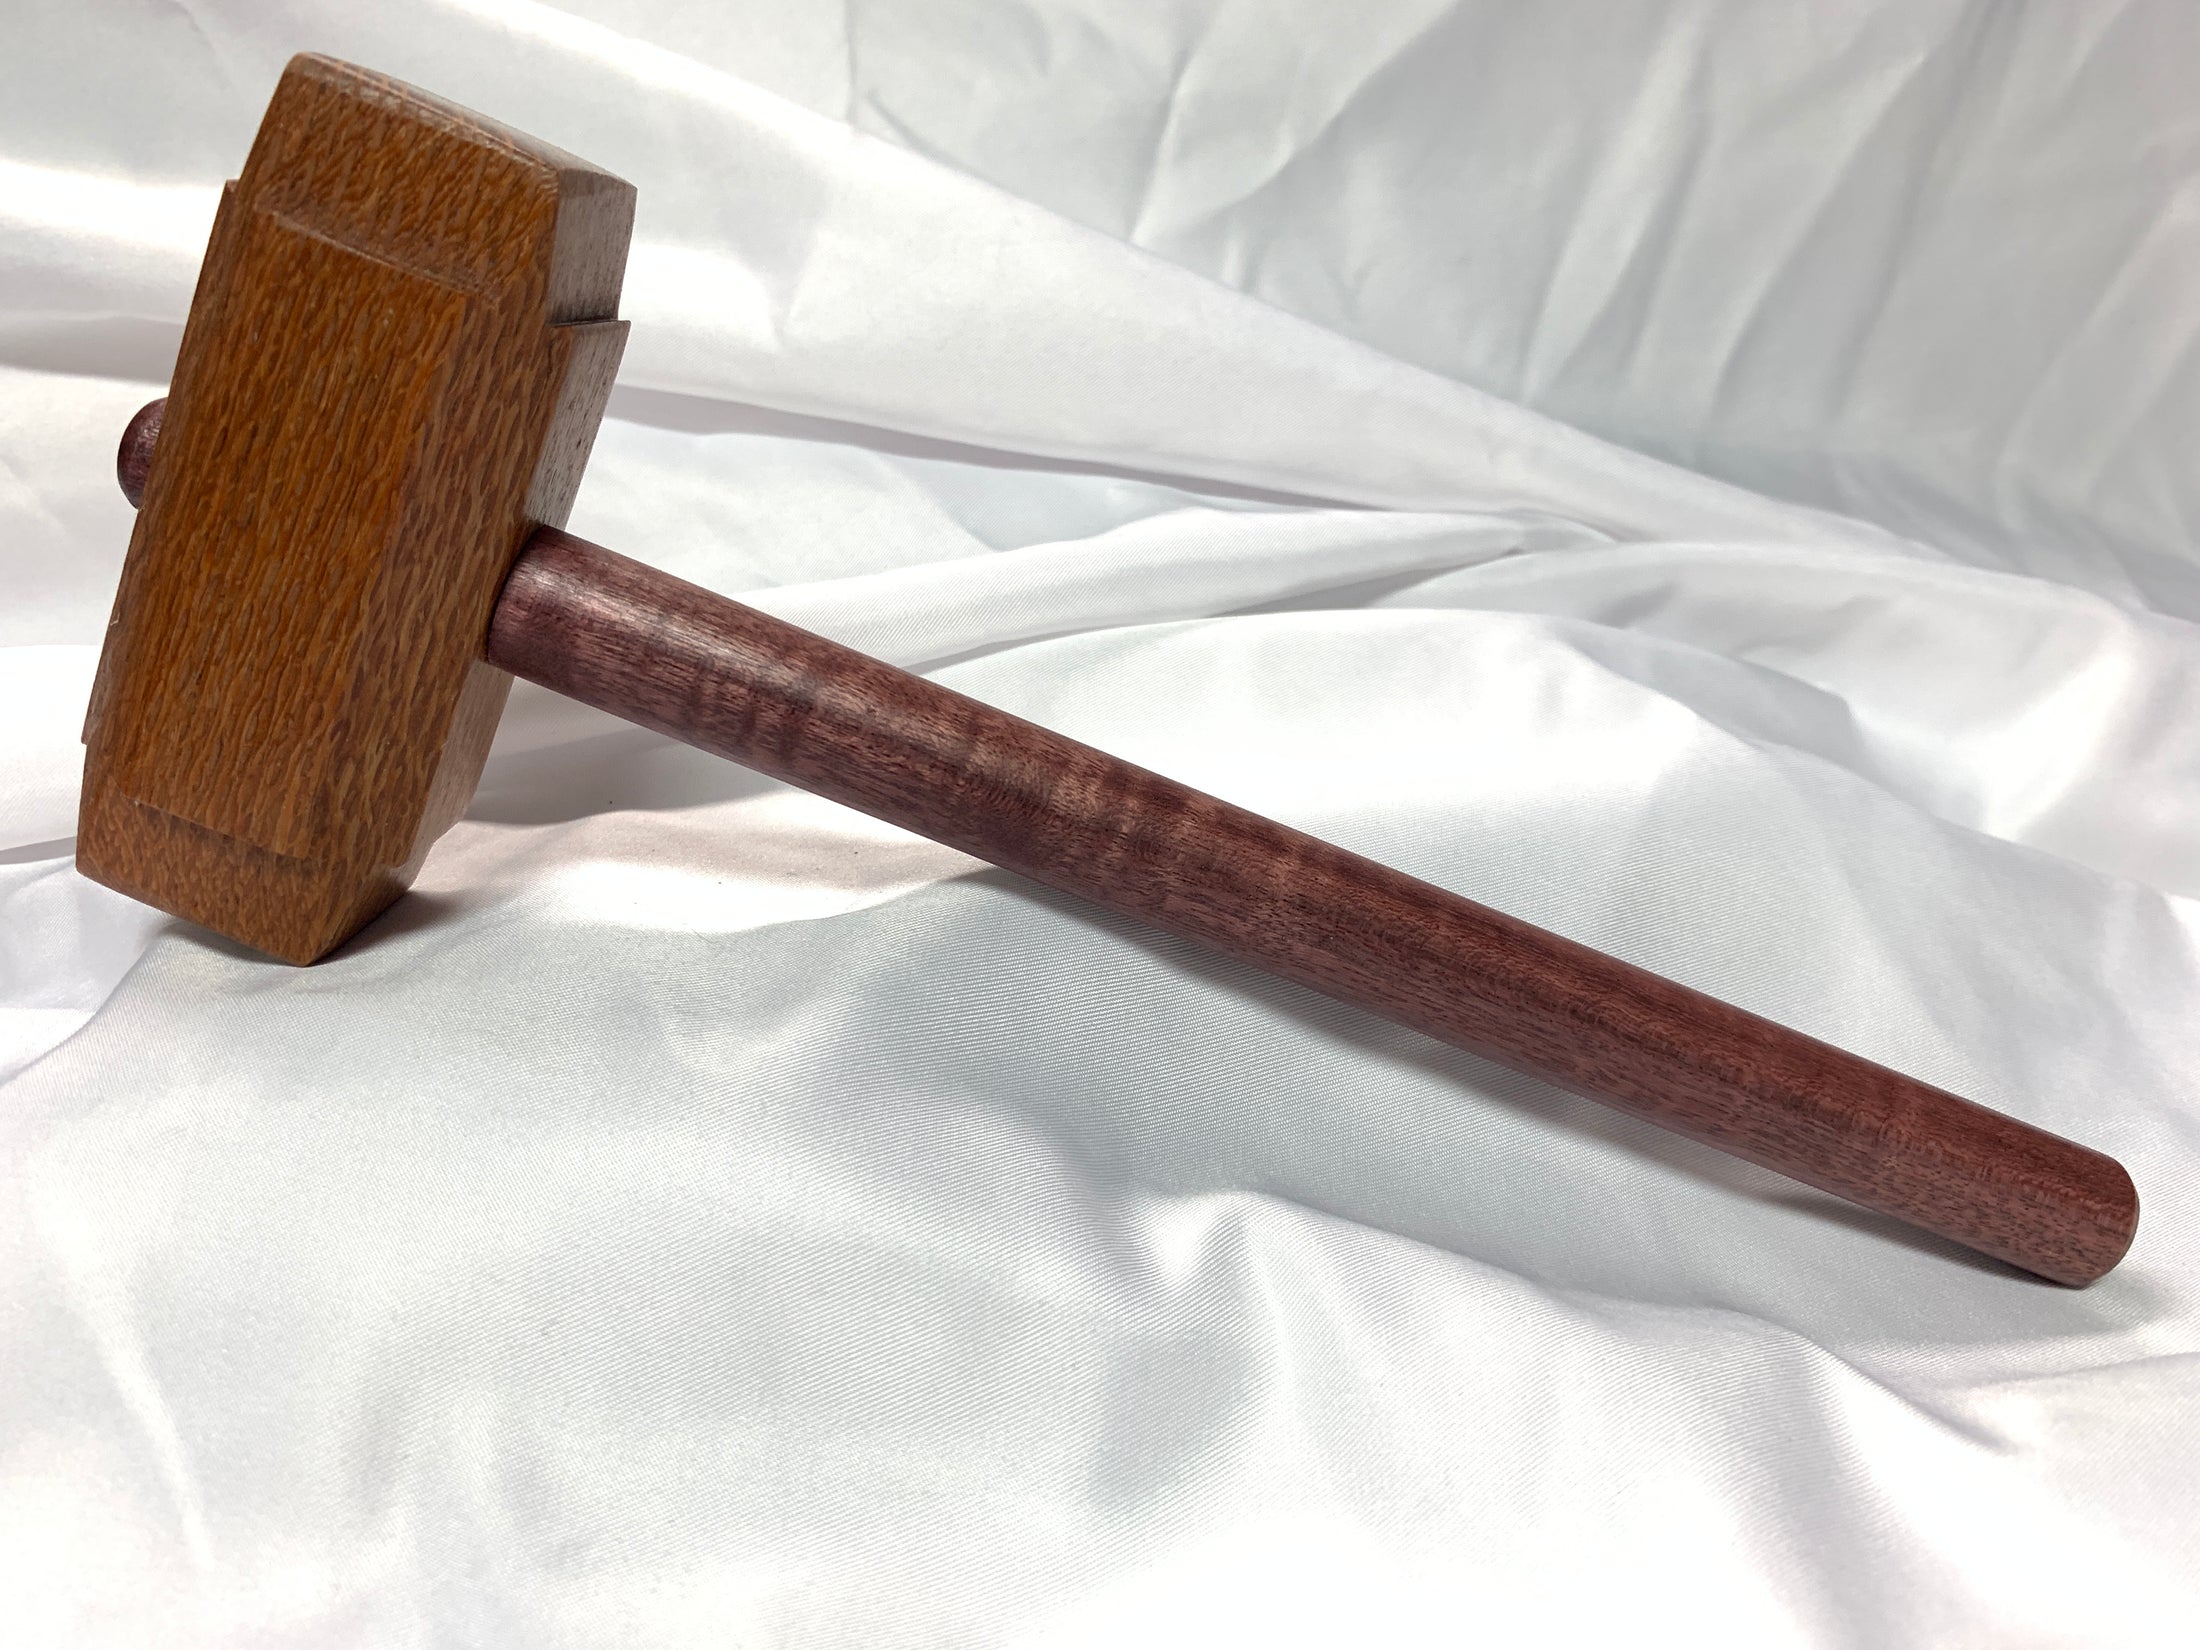 Thors Hammer Woodworking Mallet Leopardwood Head with Purpleheart Handle Kings Fine Woodworking